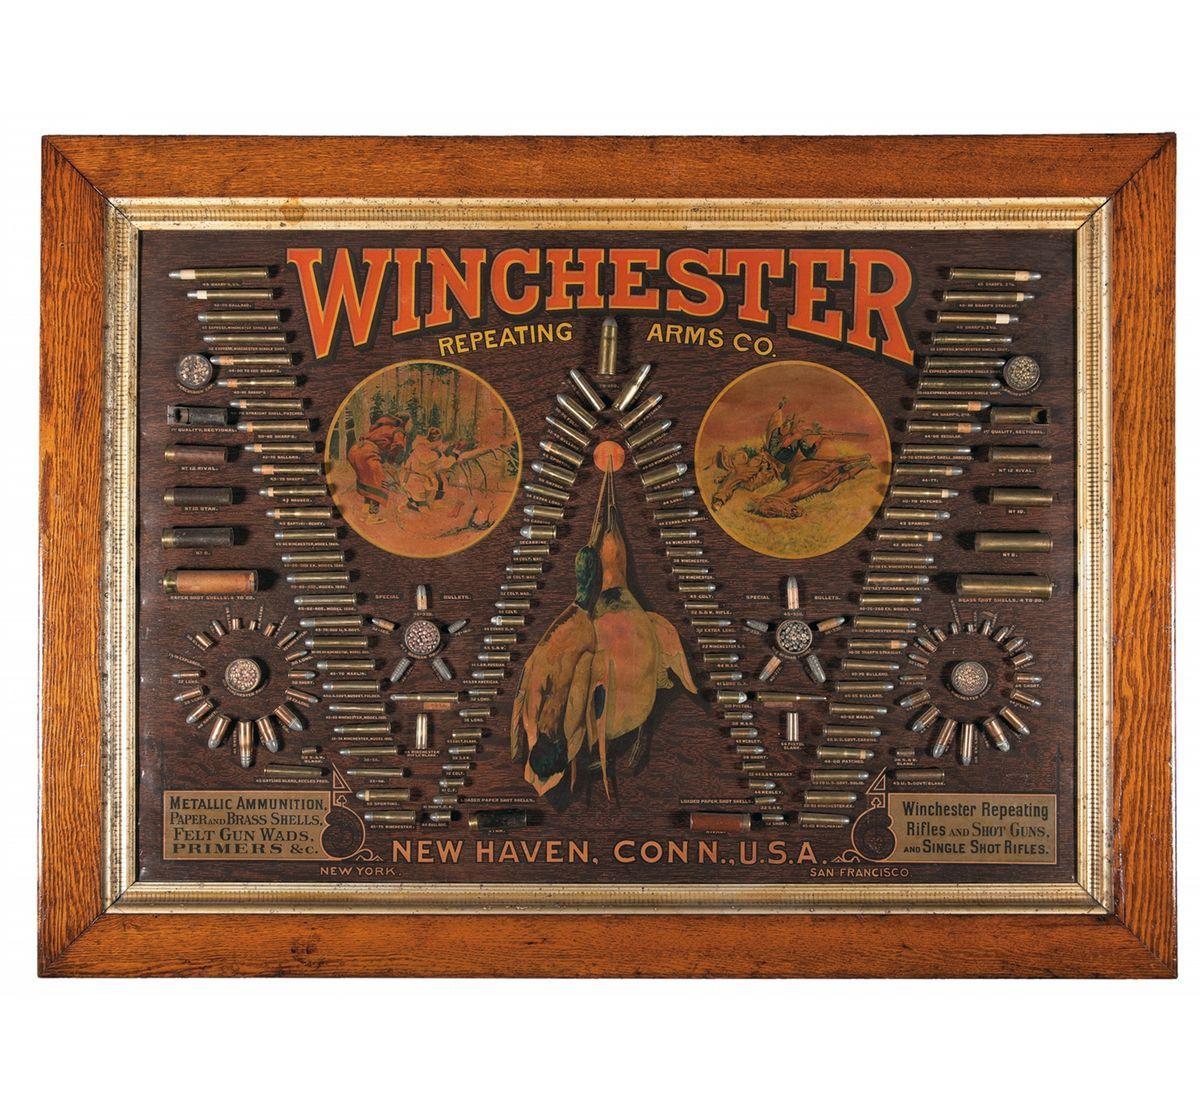 Winchester Repeating Arms Logo - Desirable Late 19th Century Single W Winchester Repeating Arms Co